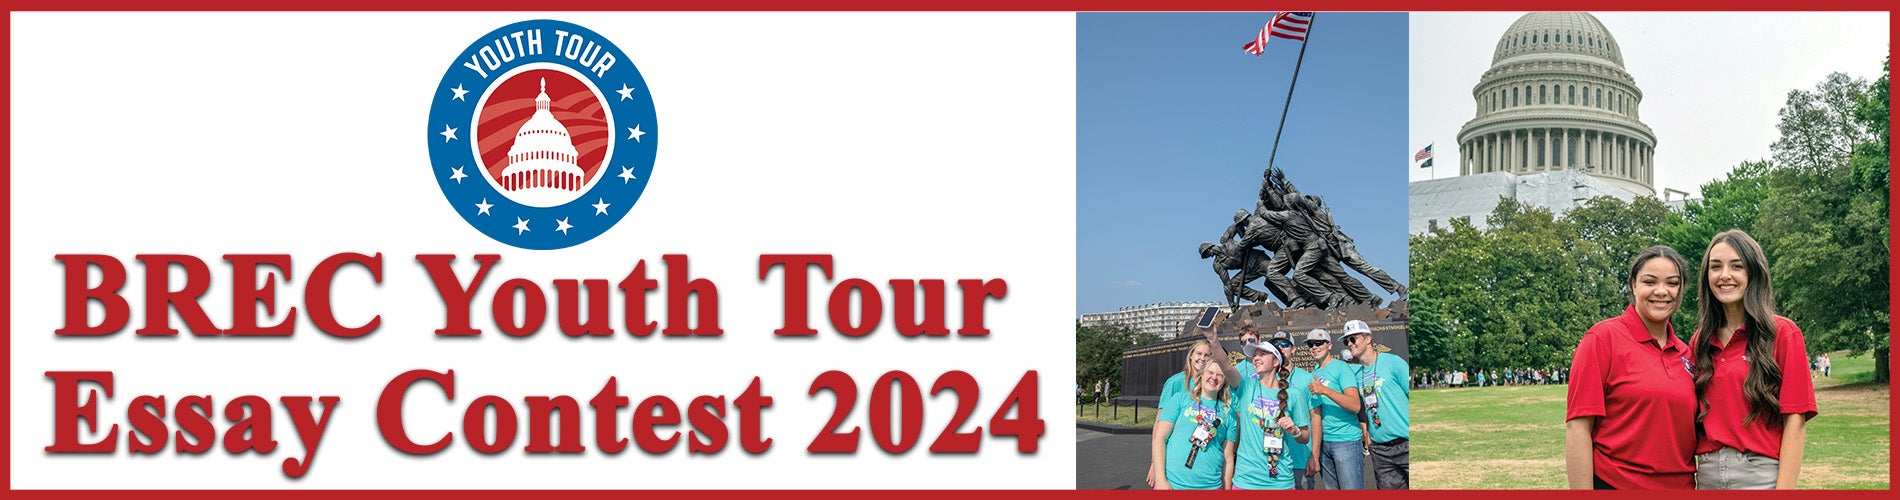 2024 Youth Tour Essay Contest